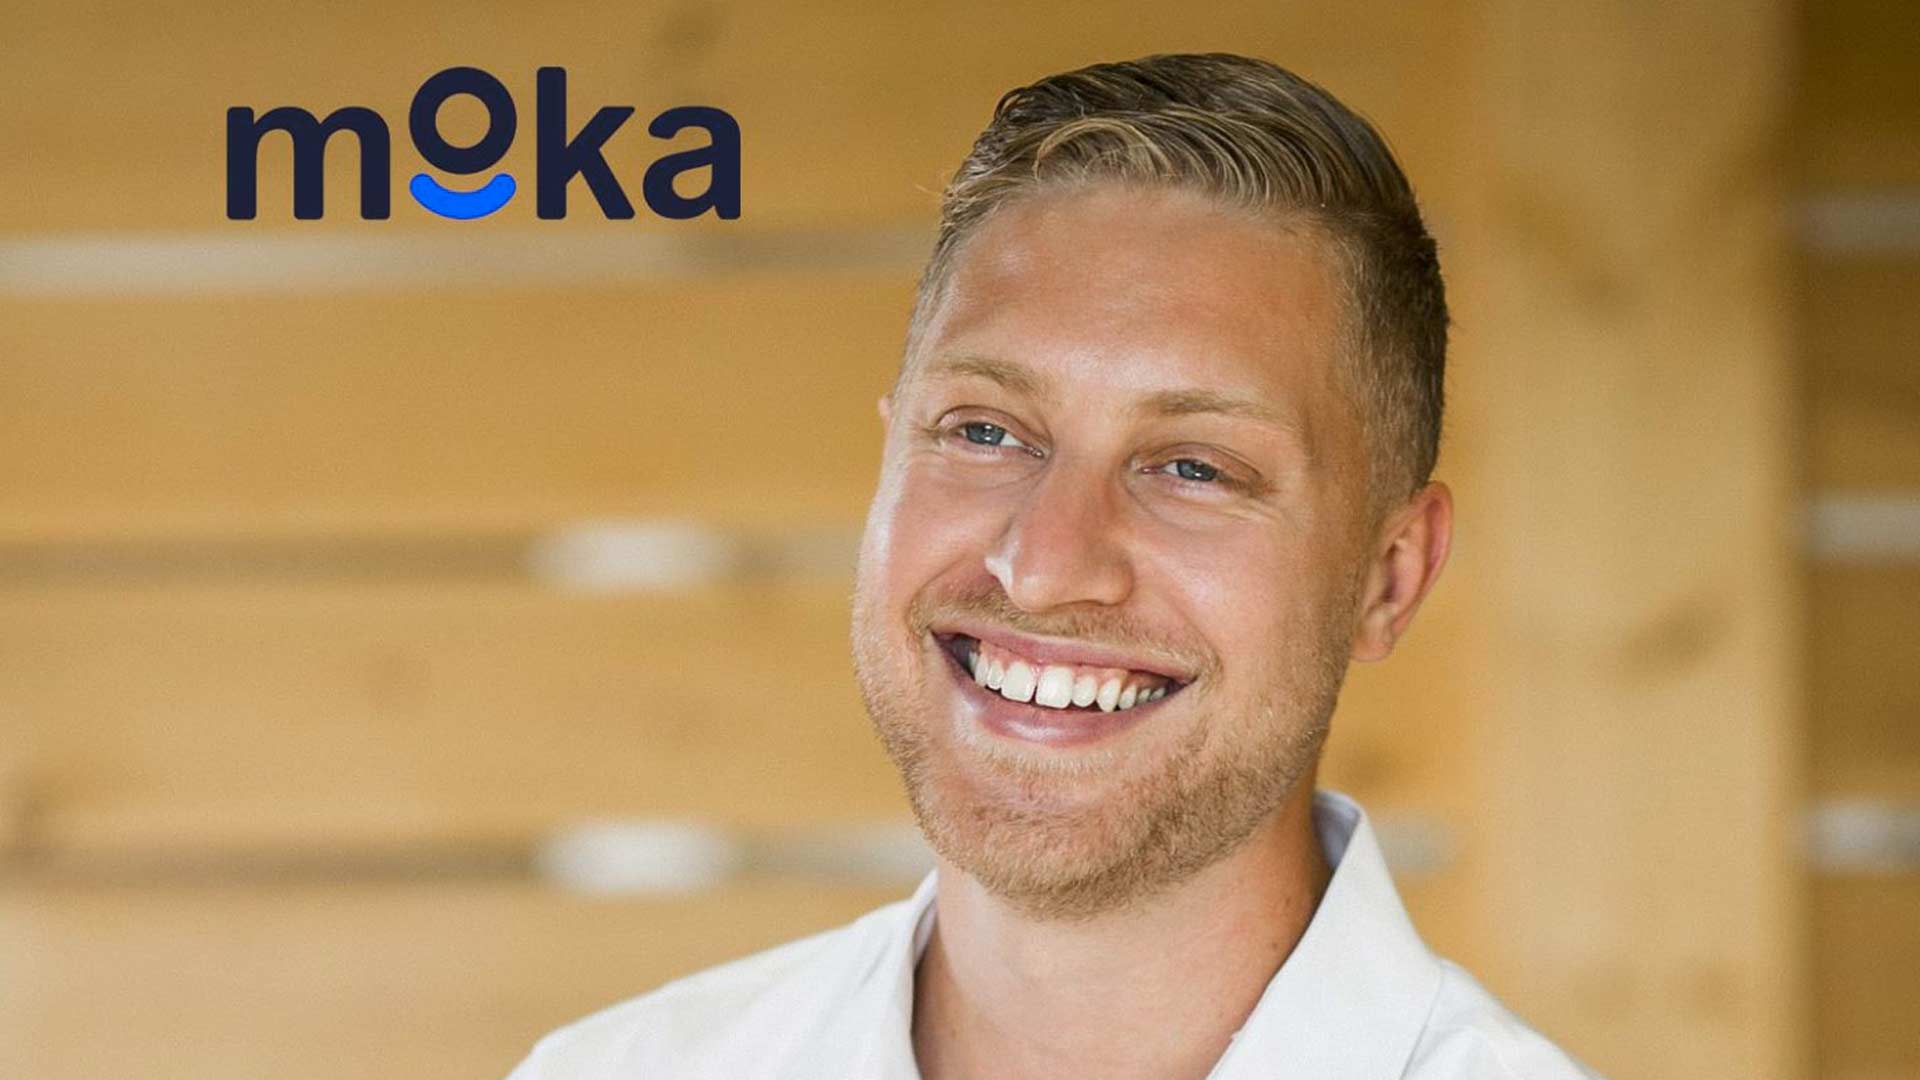 Moka, the Unique and Innovative Business Taking Paris Region by Storm